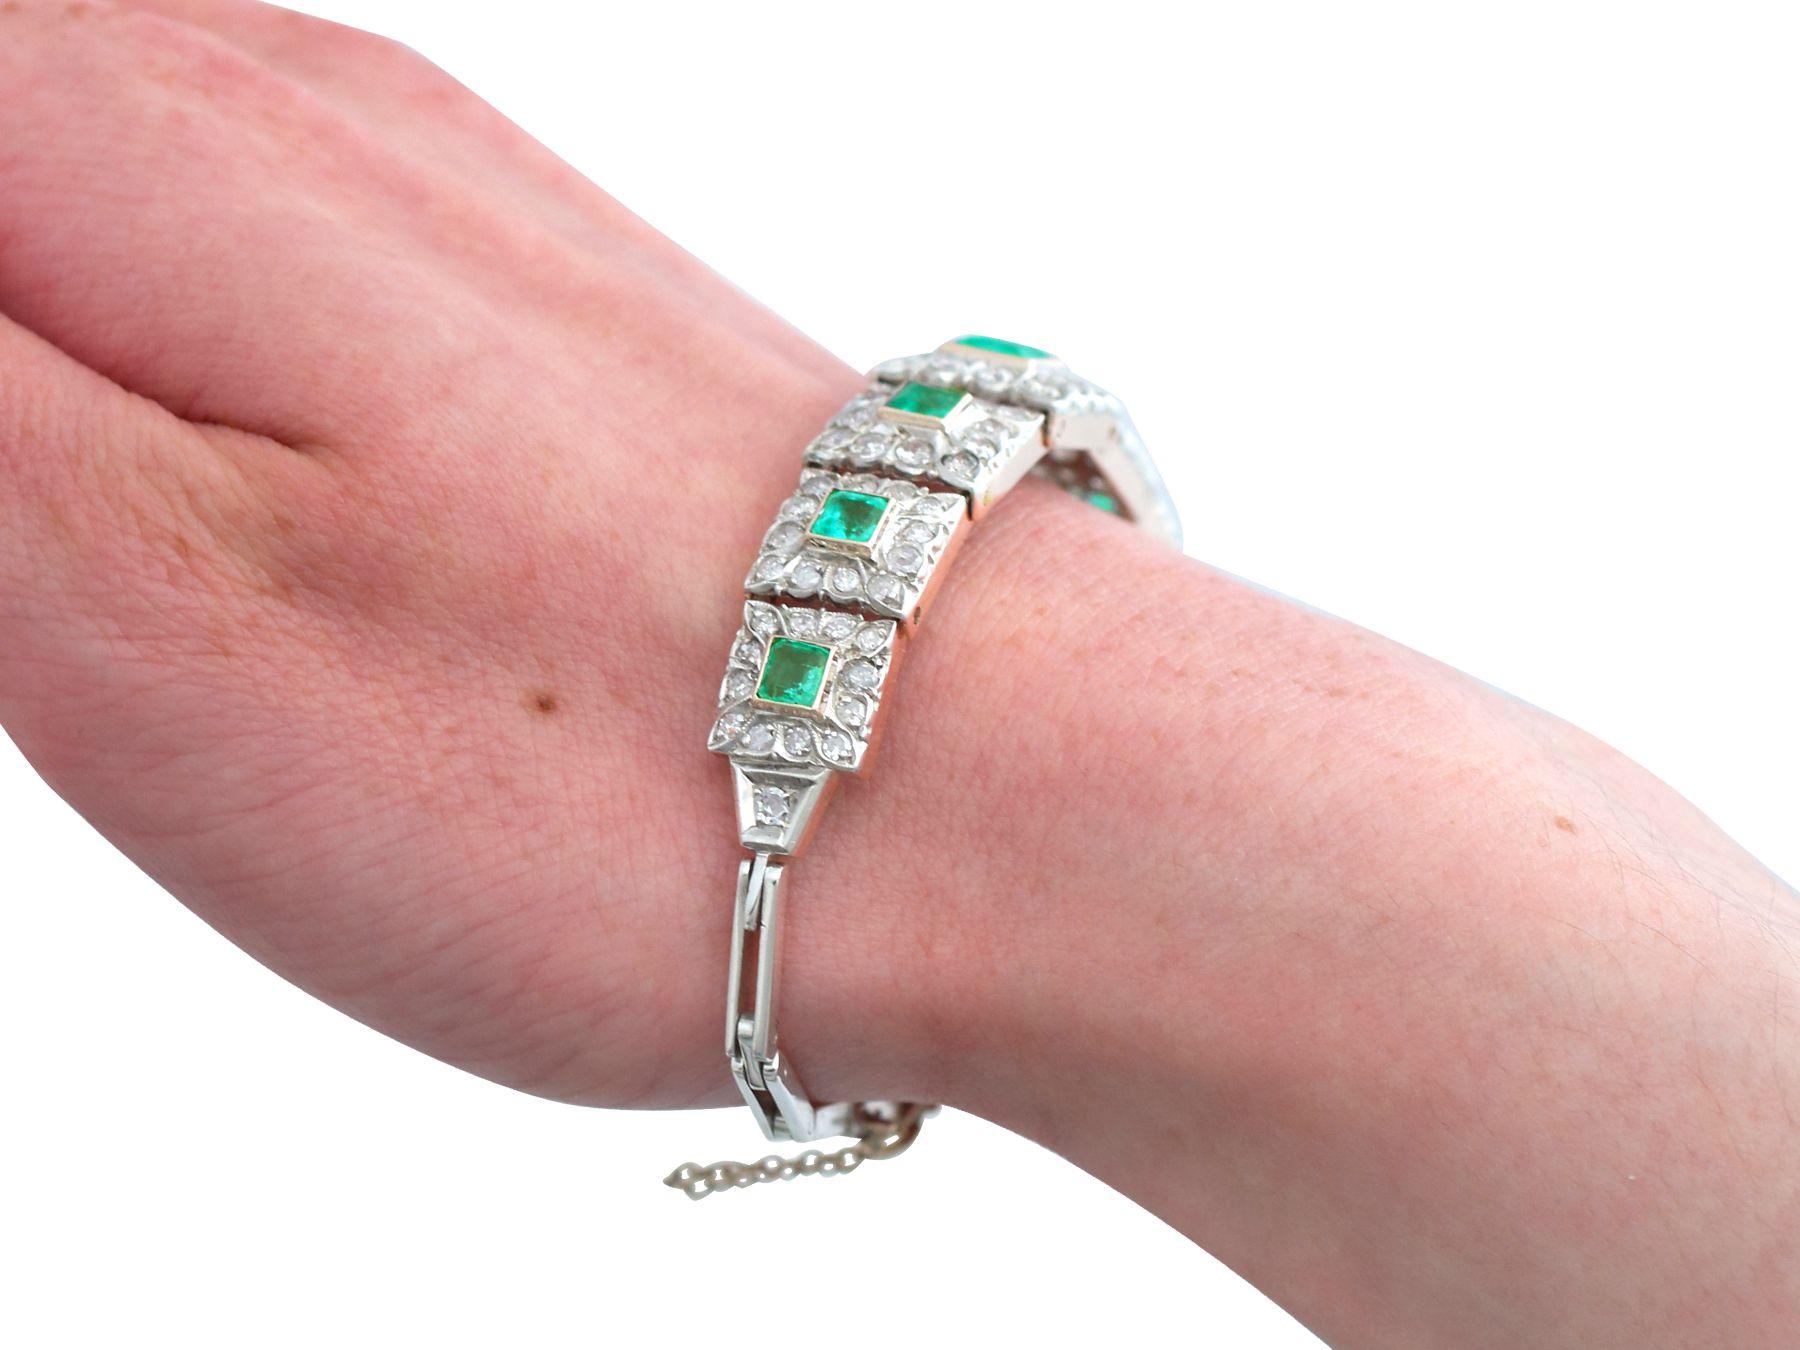 Crivelli Emerald Collection Gold Bracelet, Diamonds and emerald 3.60 ct -  057-247-1